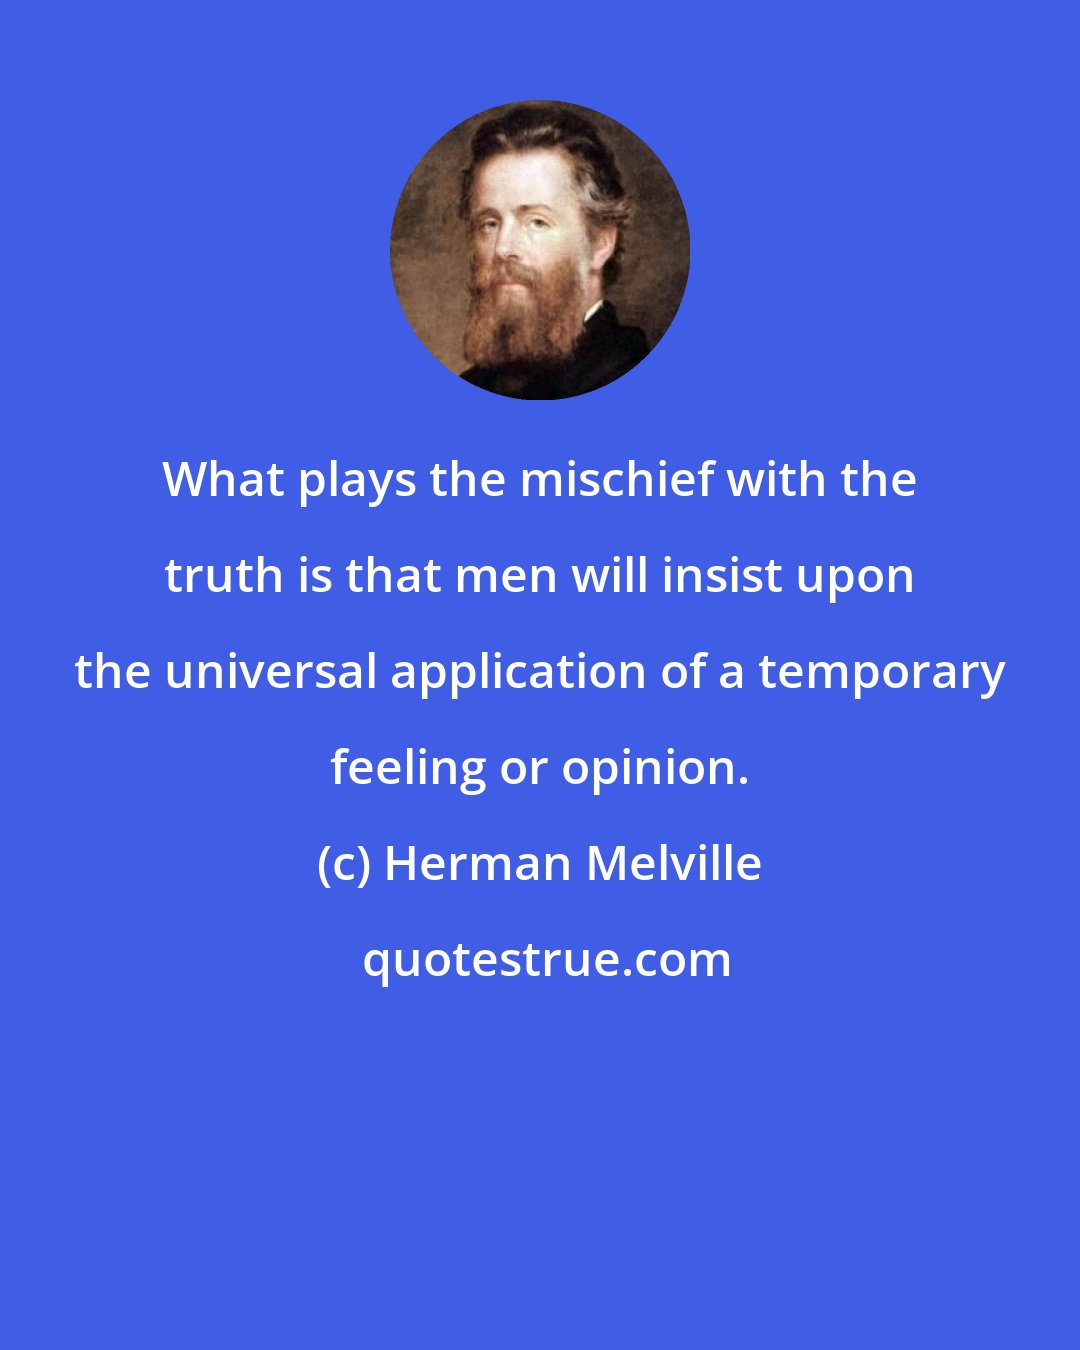 Herman Melville: What plays the mischief with the truth is that men will insist upon the universal application of a temporary feeling or opinion.